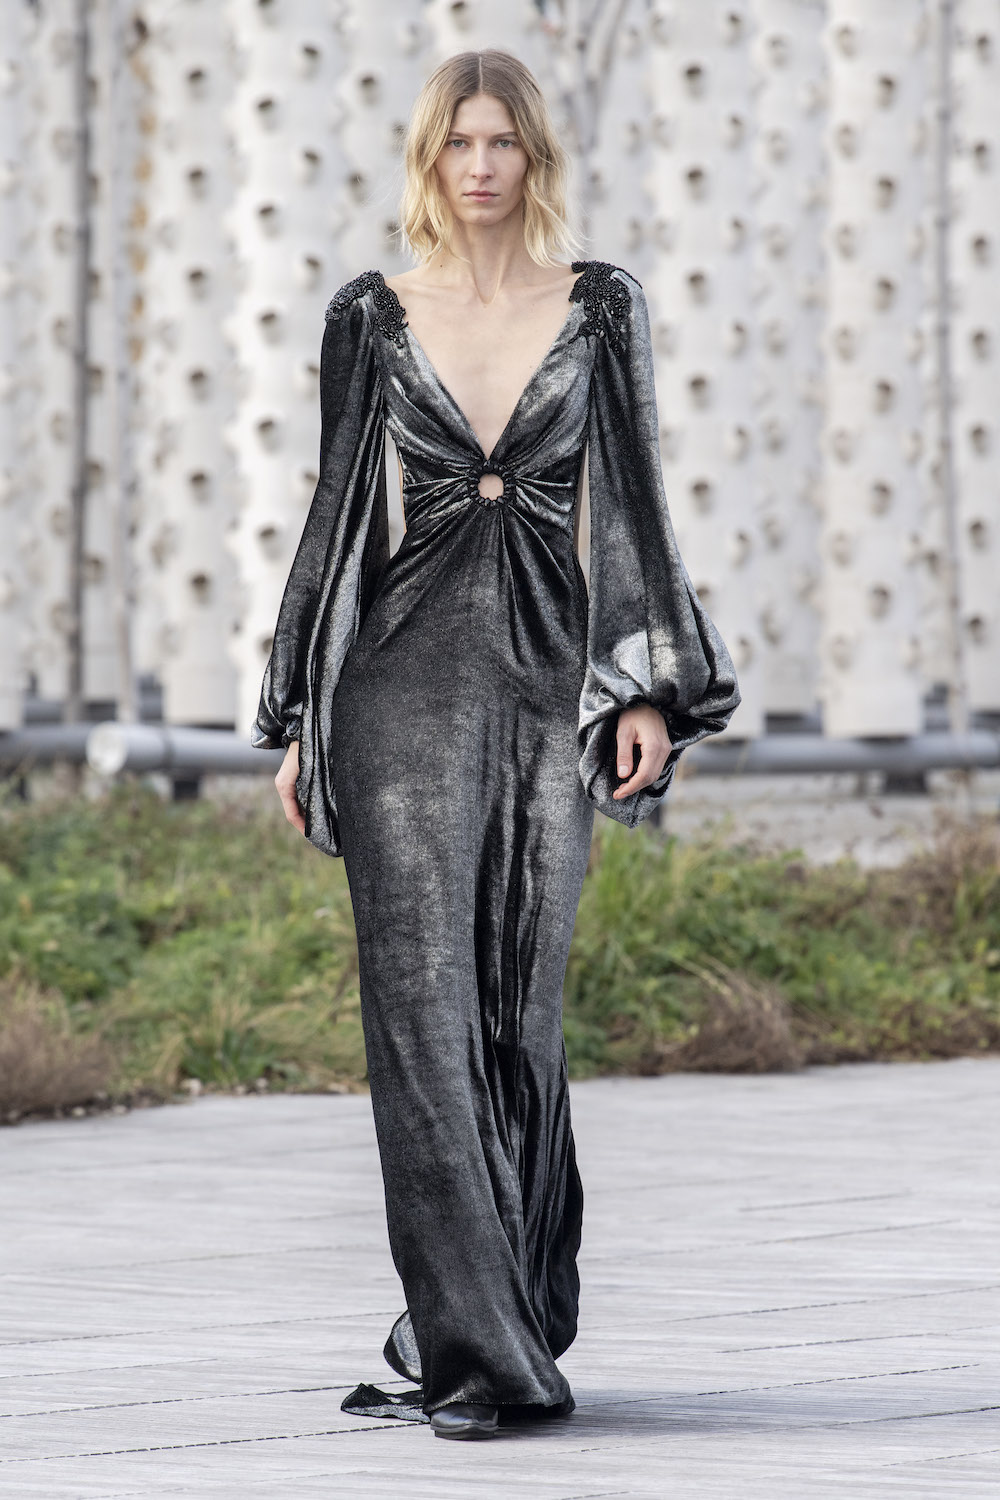  A look from the Azzaro Couture Spring Summer 2022 show.